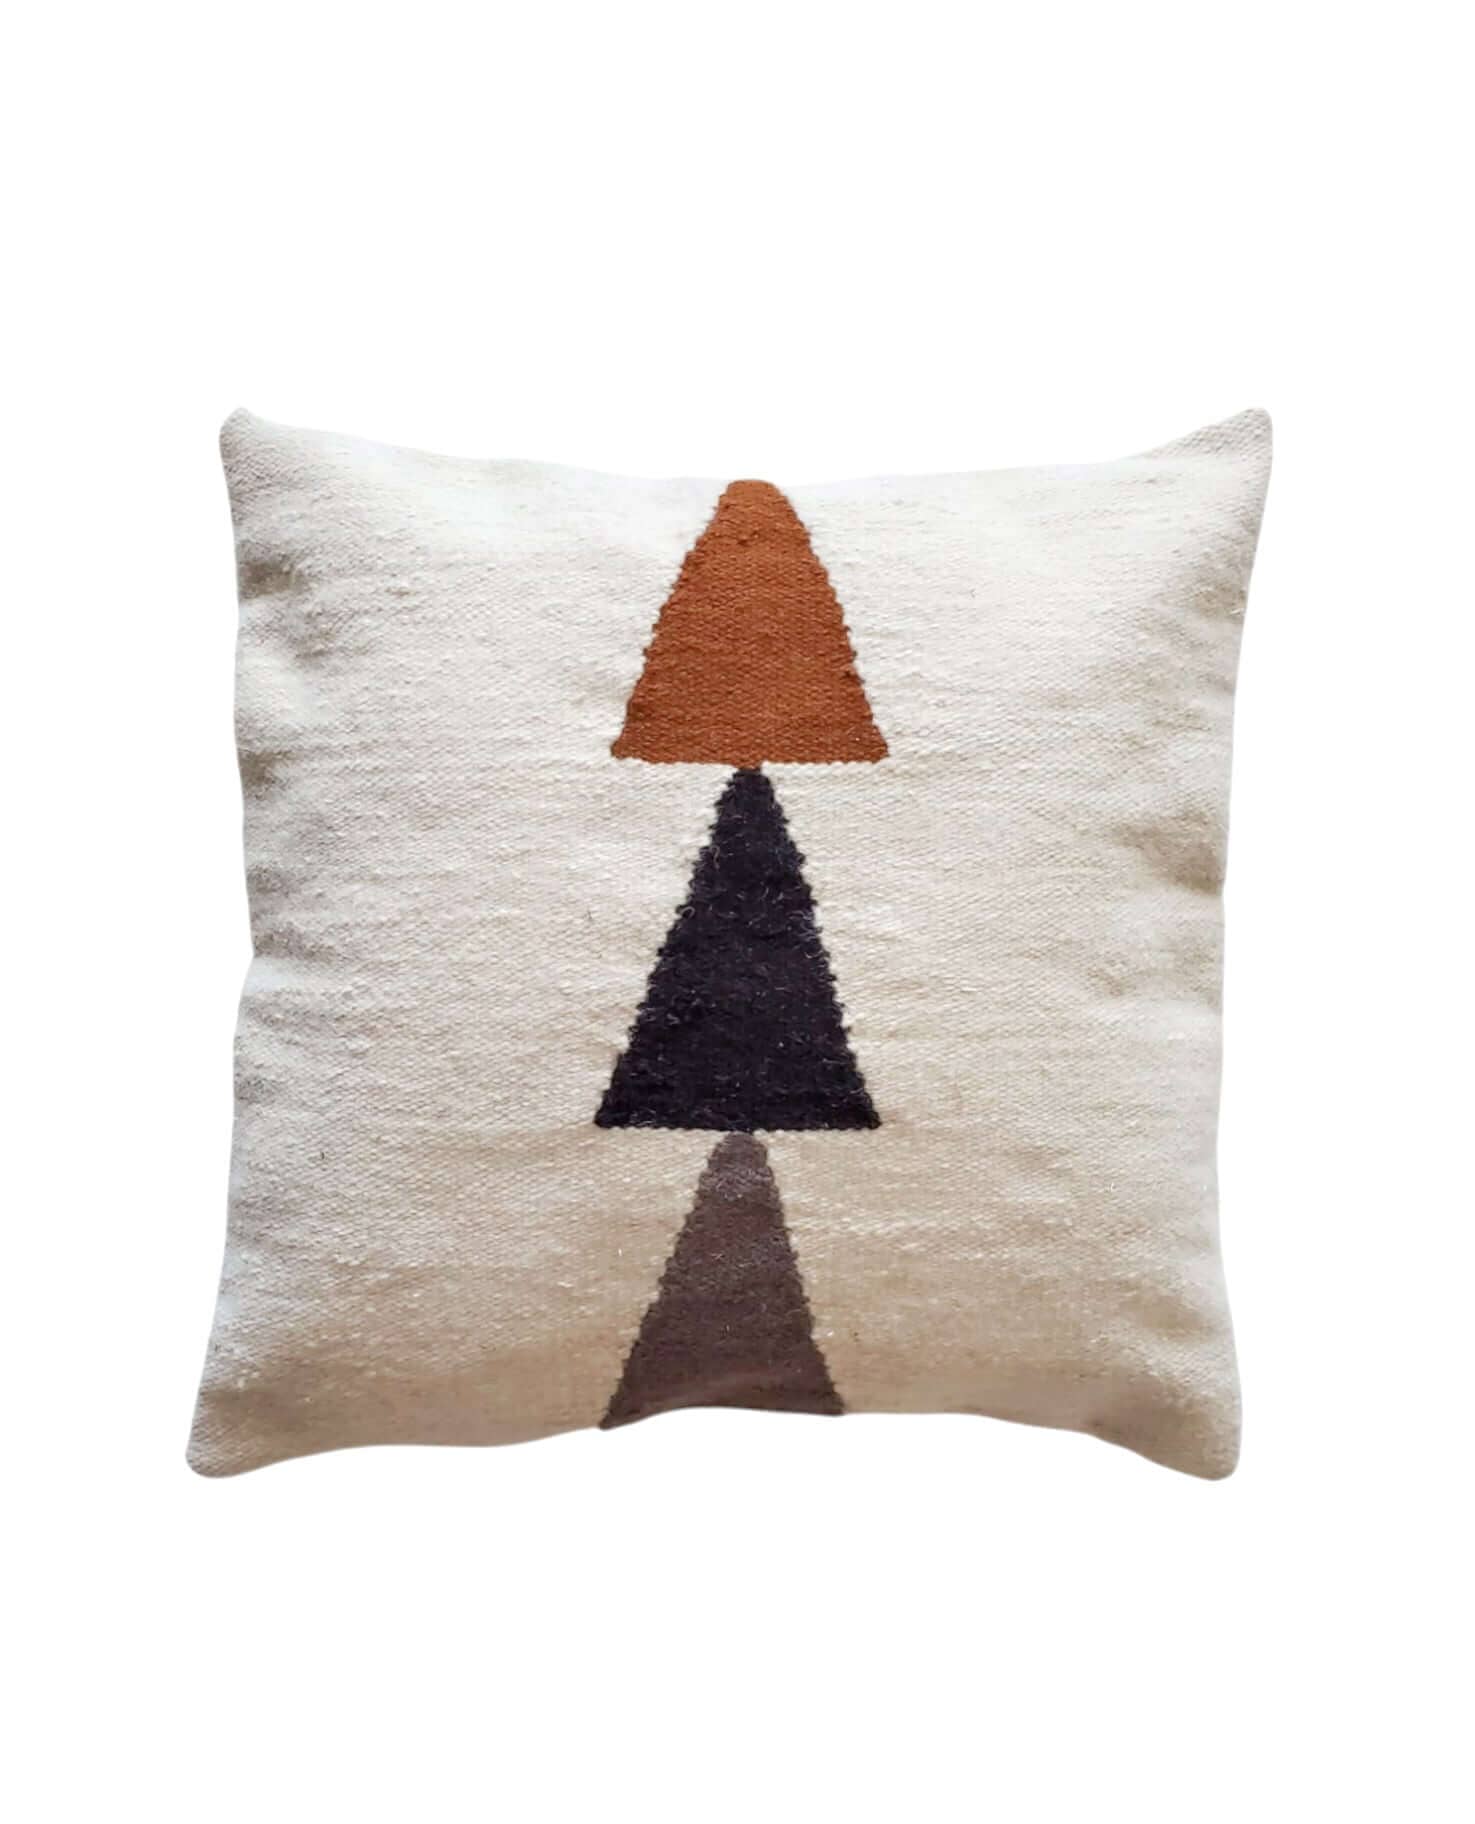 Bloom Handwoven Wool Decorative Throw Pillow Cover